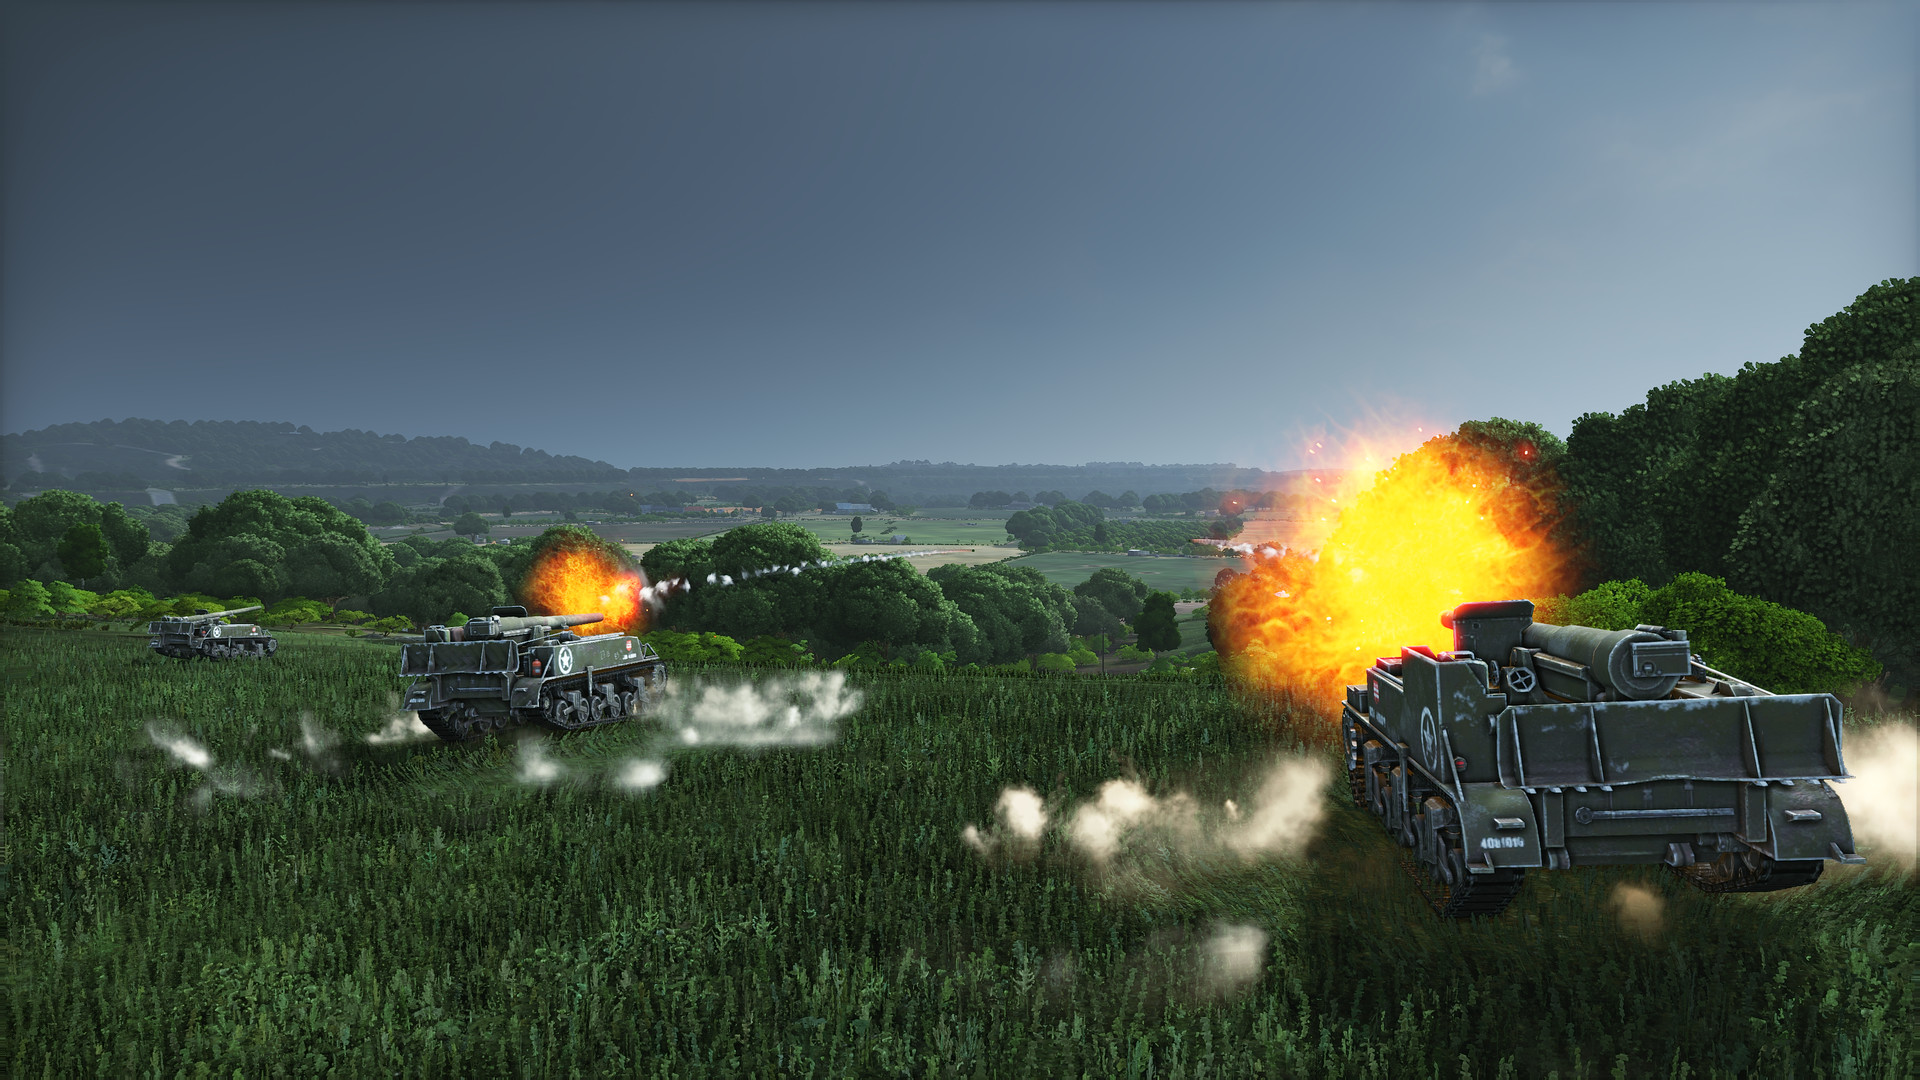 steel division normandy 44 second wave download free